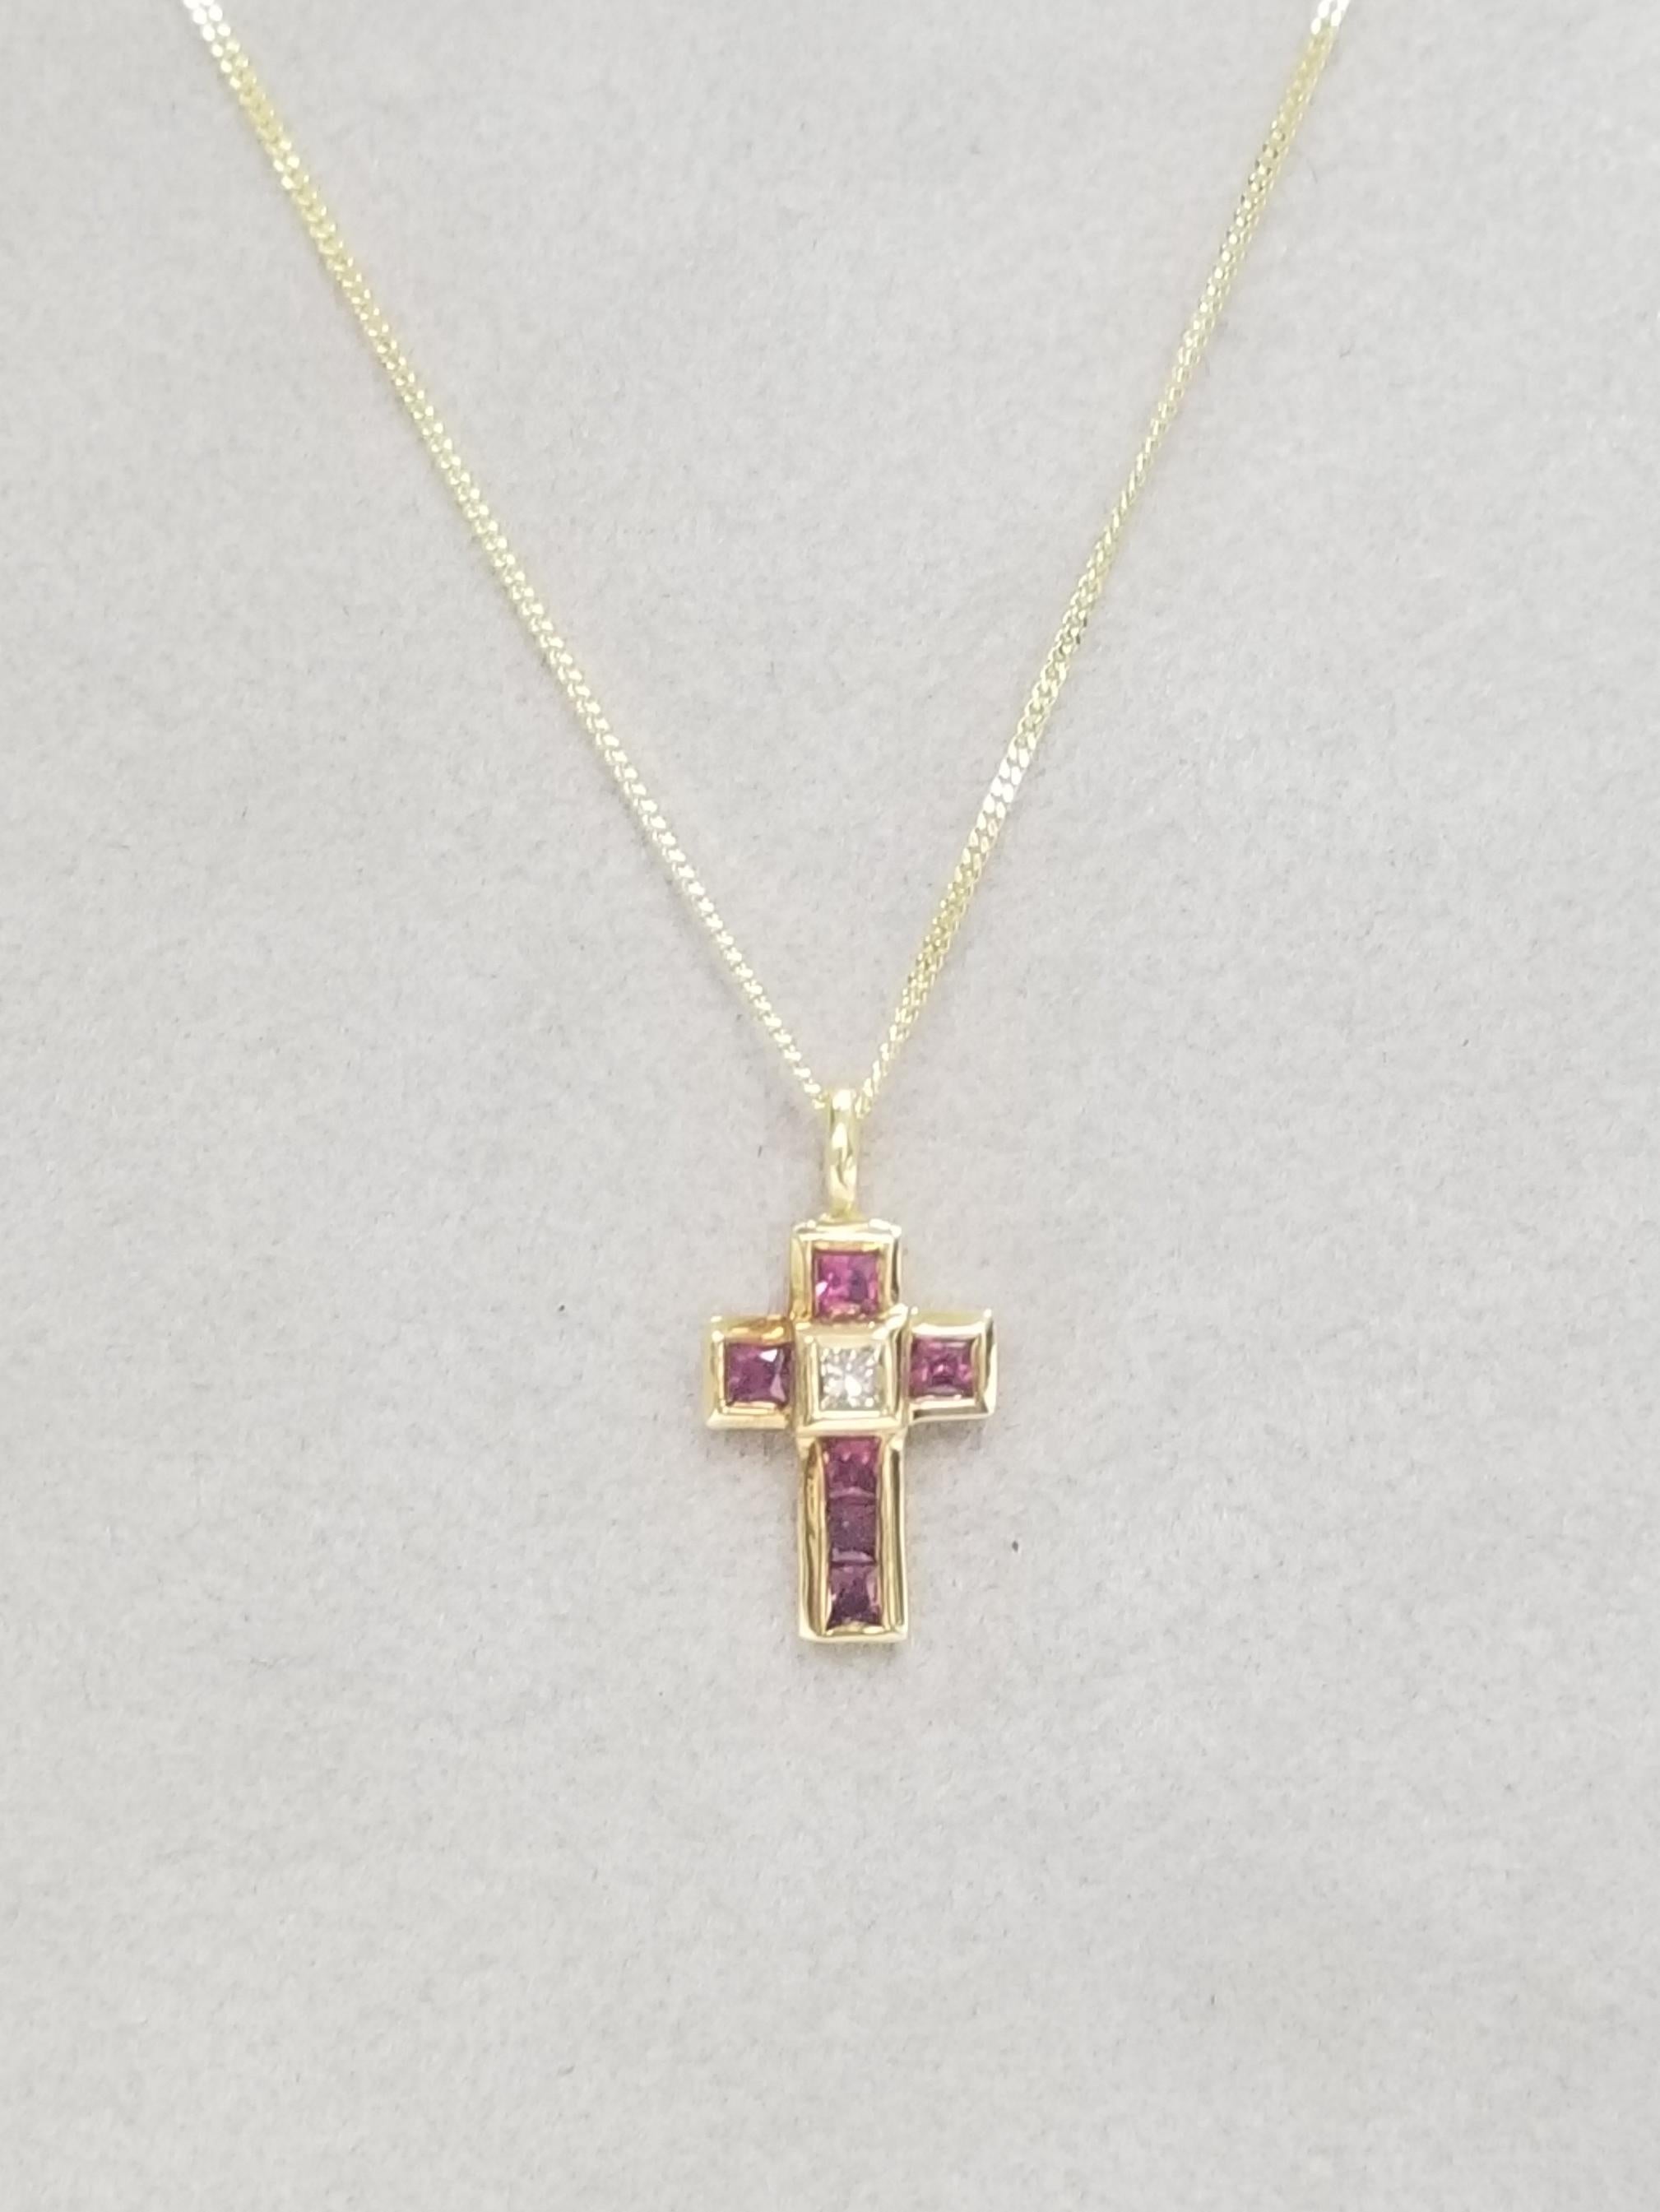 18k yellow gold ruby and diamond pendant containing 6 princess cut rubies of gem quality weighing .50pts. and 1 princess cut diamond of very fine quality weighing .10pts. on a 14k yellow gold 18 inch chain.